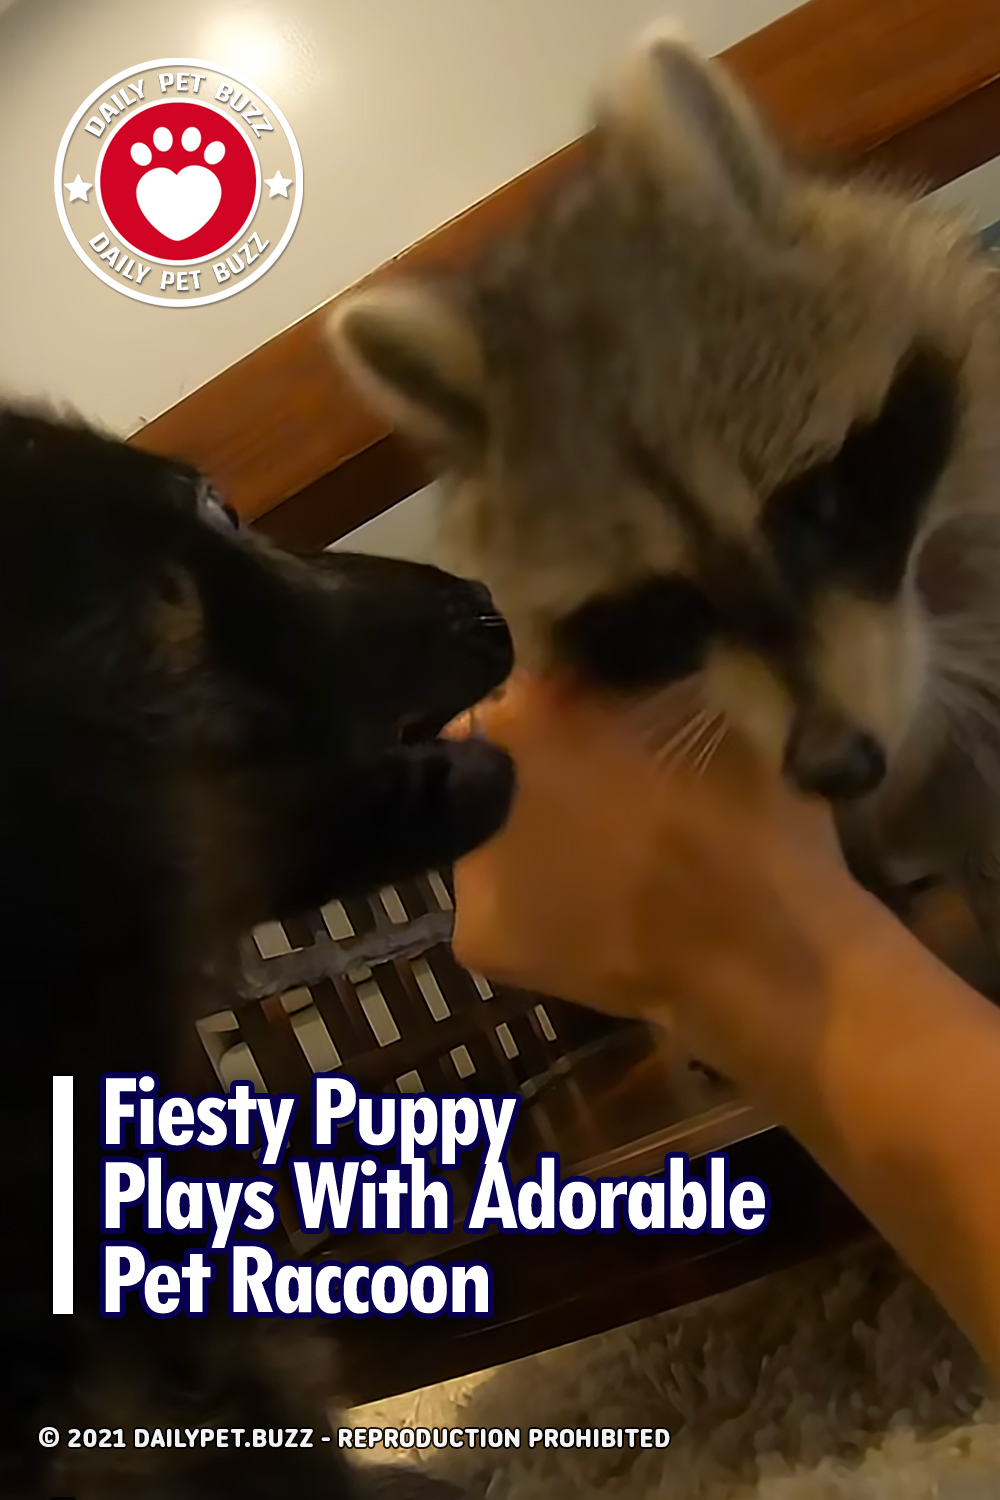 Fiesty Puppy Plays With Adorable Pet Raccoon